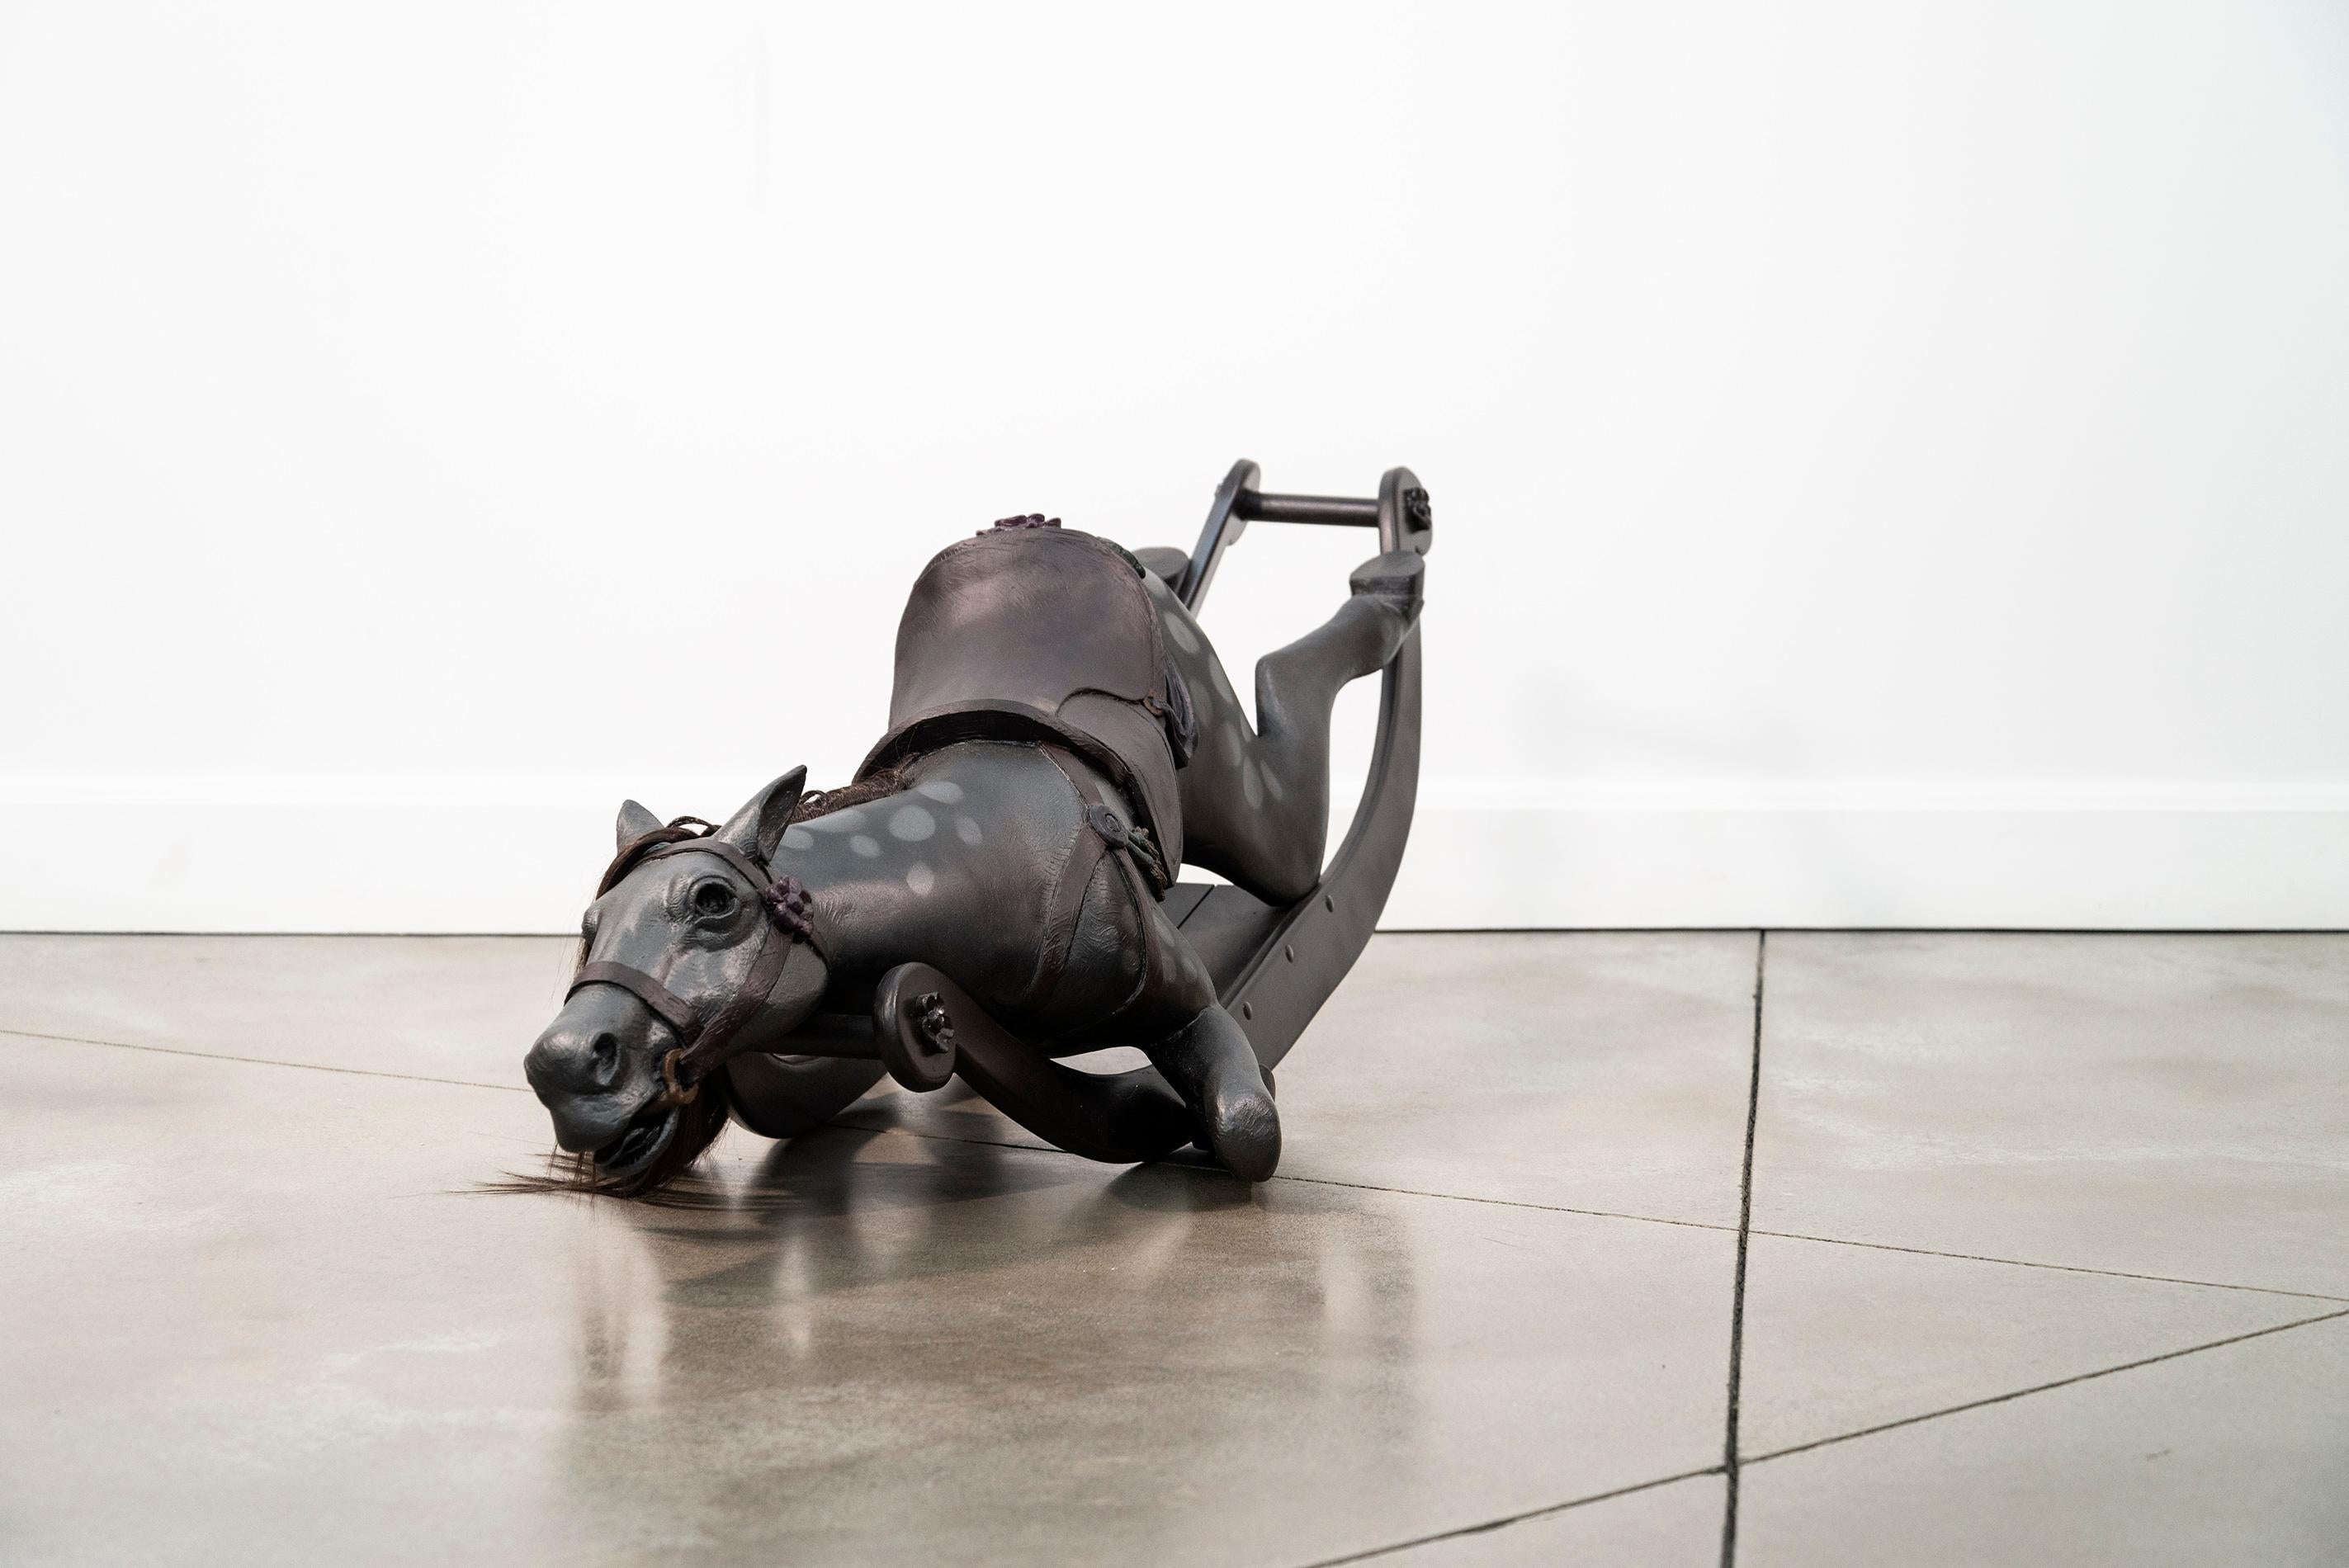 It is a powerful image—at once compelling and provocative—an old-fashioned rocking horse, collapsed. This is the work of Nicholas Crombach.

The Kingston based artist creates sculptures from a variety of cast mediums including bronze and resin. This